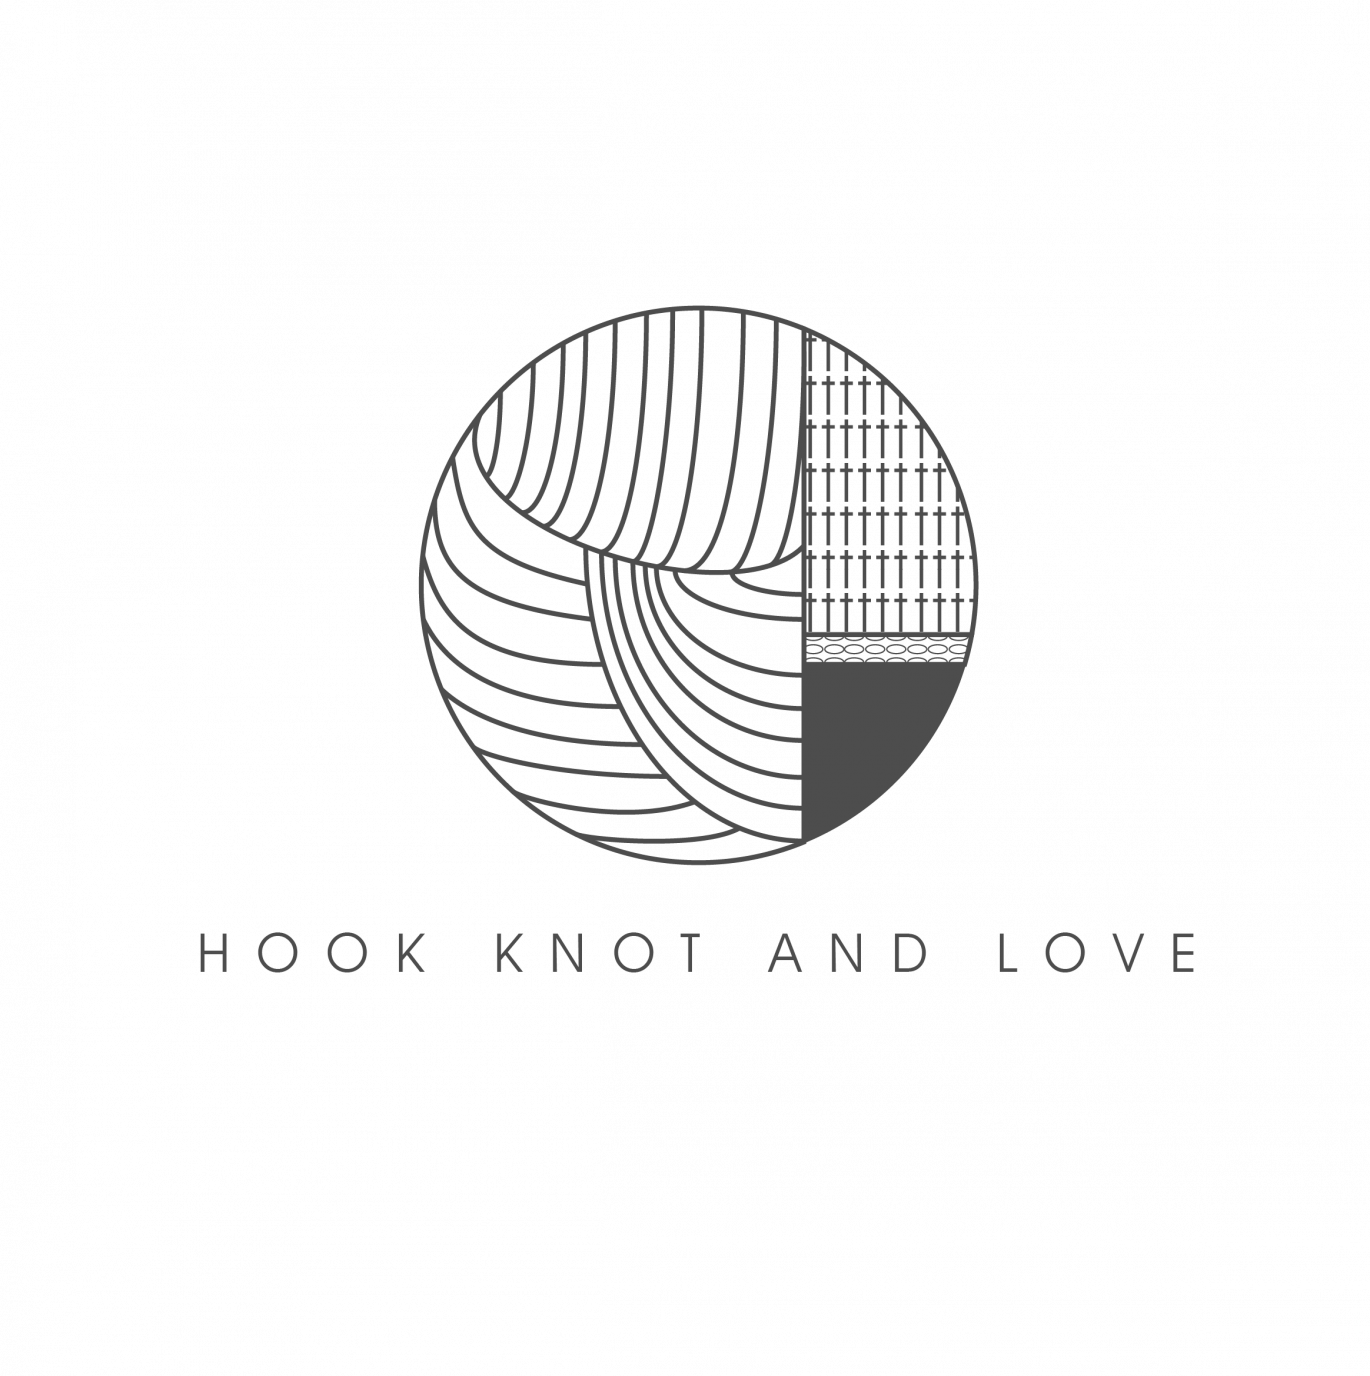 Hook Knot and Love